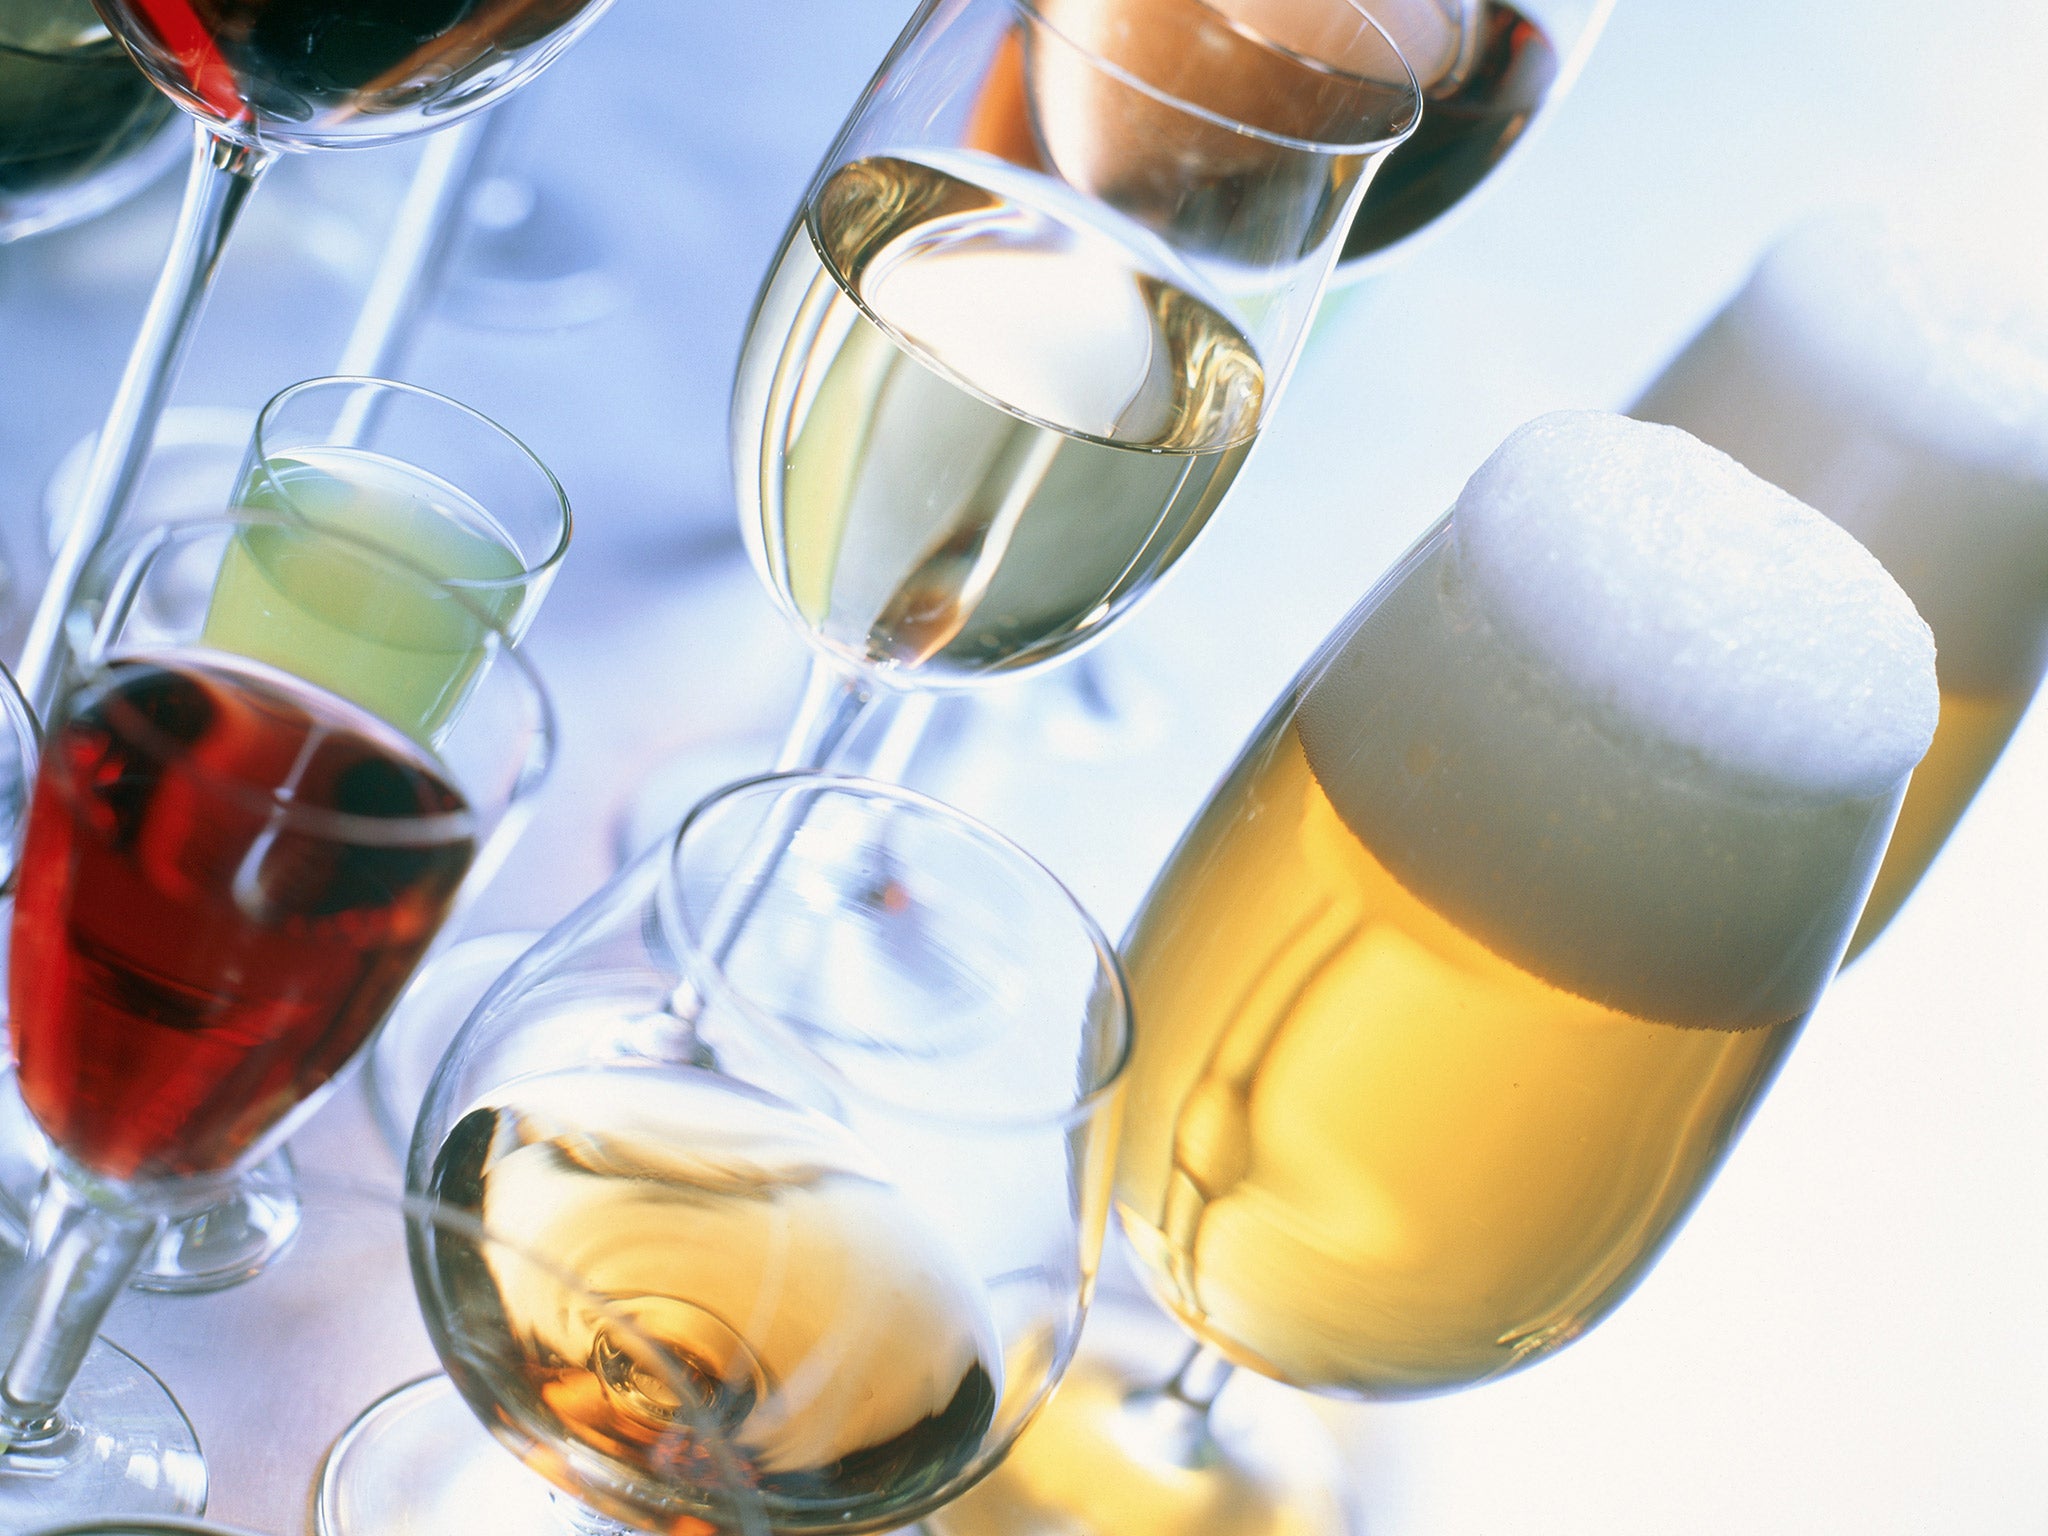 60 per cent of adults say they choose wine over other alcoholic drinks